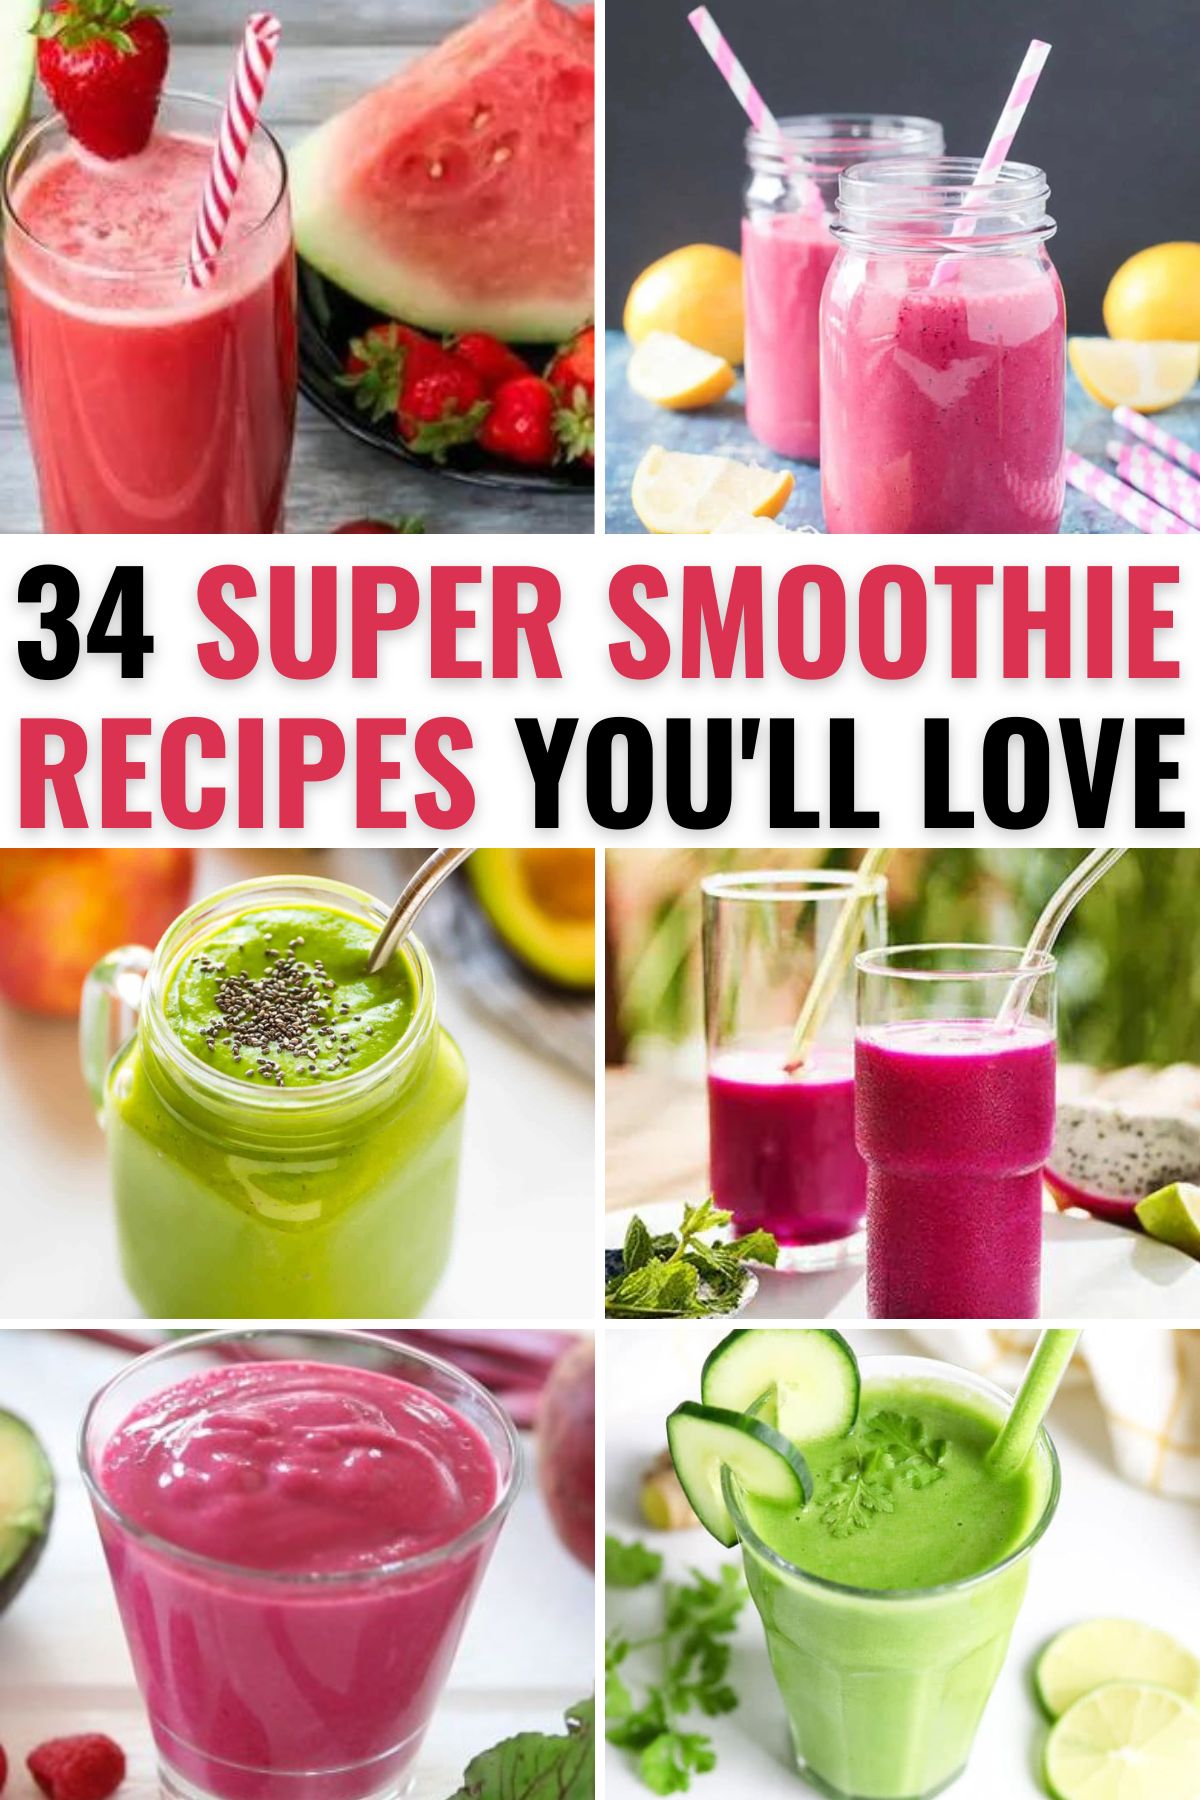 A collection of super smoothie recipes